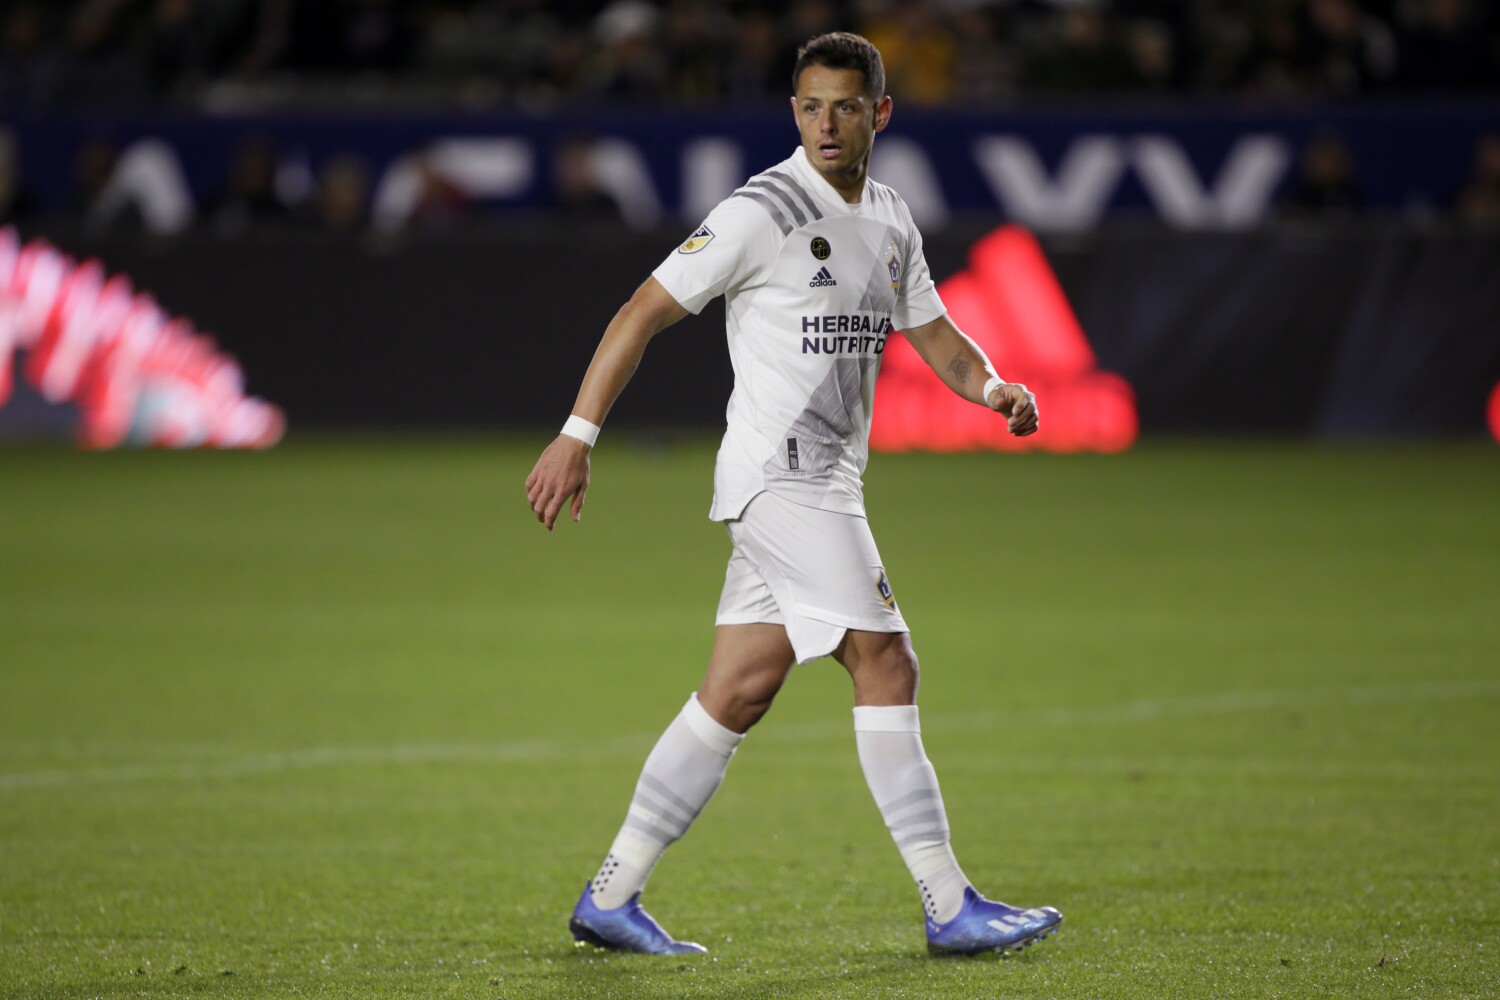 Galaxy continue to get nothing done in loss to Earthquakes